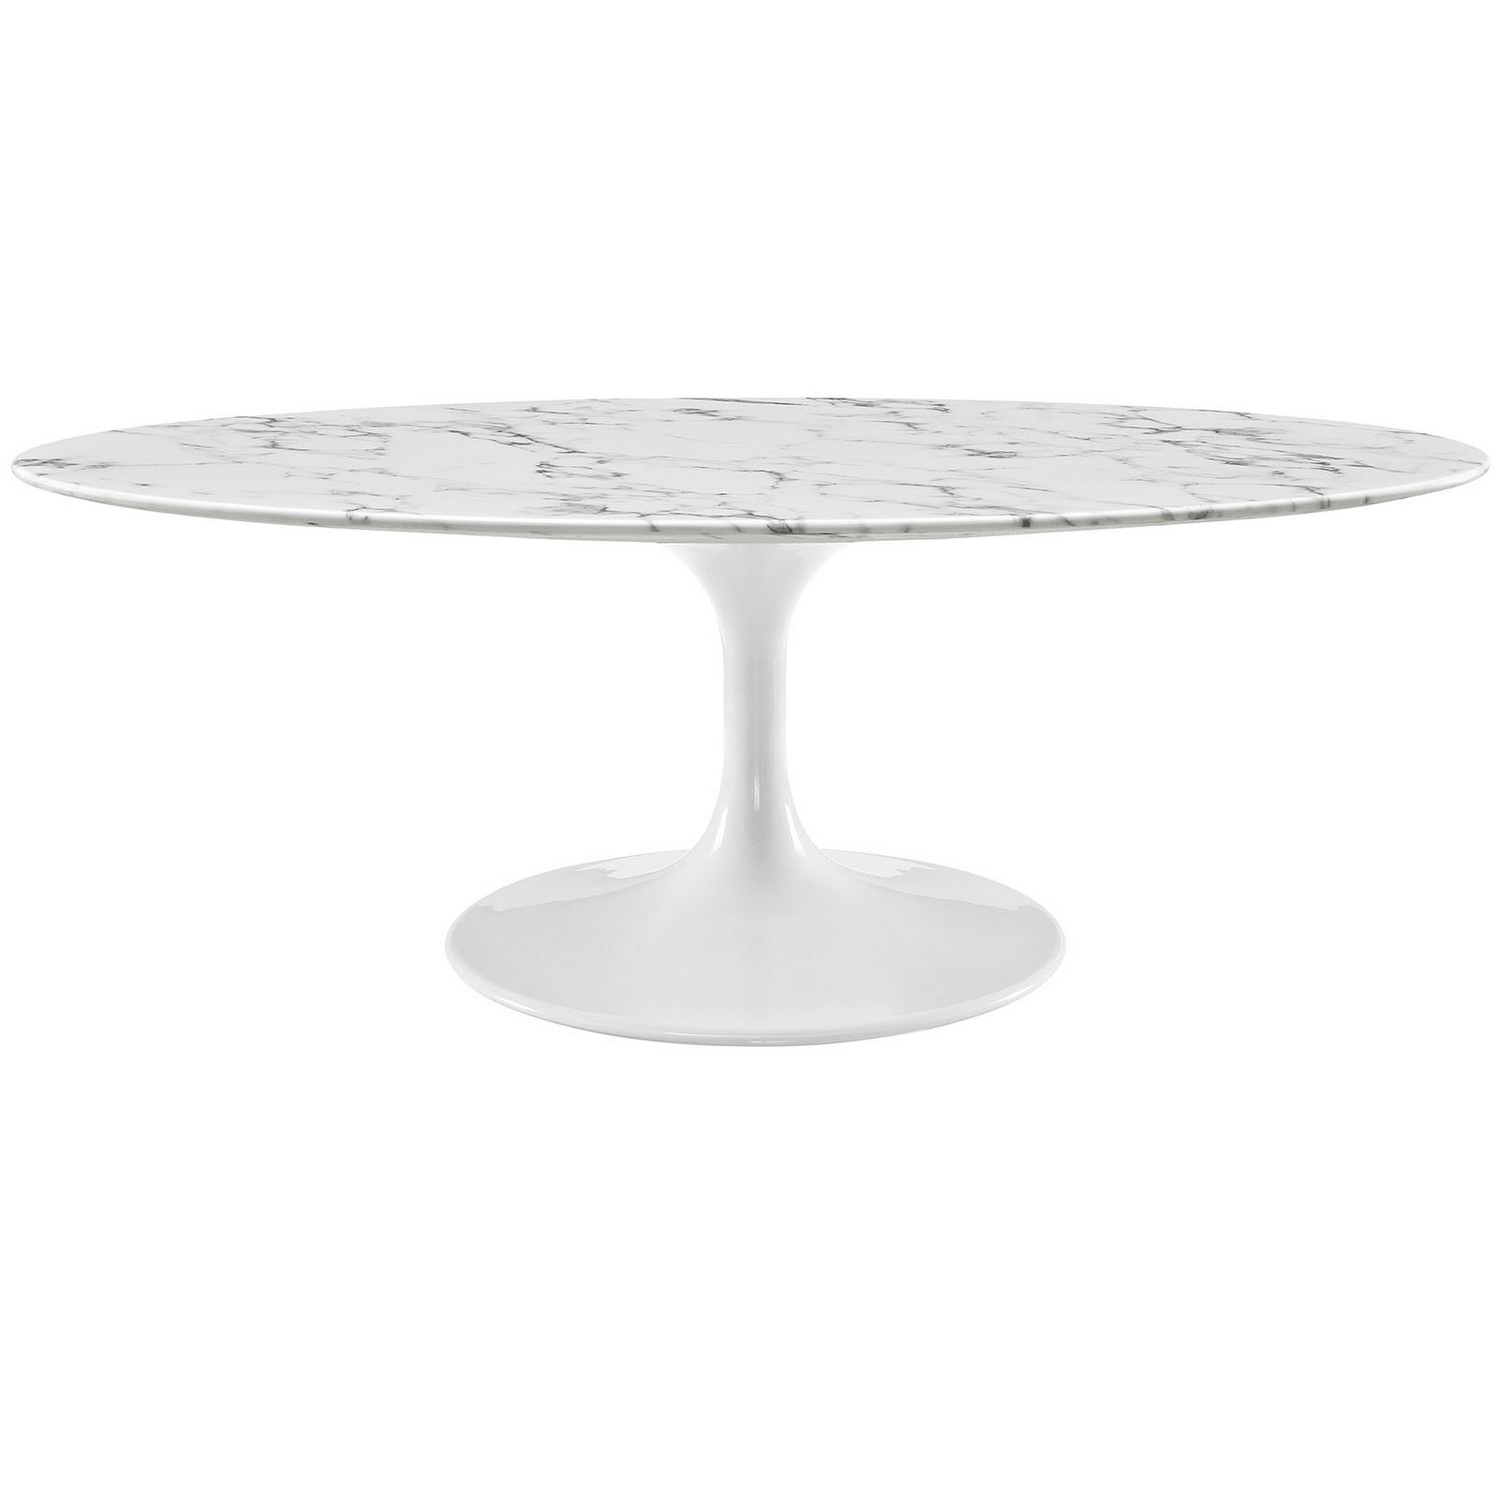 Modway Lippa 48-inch Oval-Shaped Artificial Marble Coffee Table - White